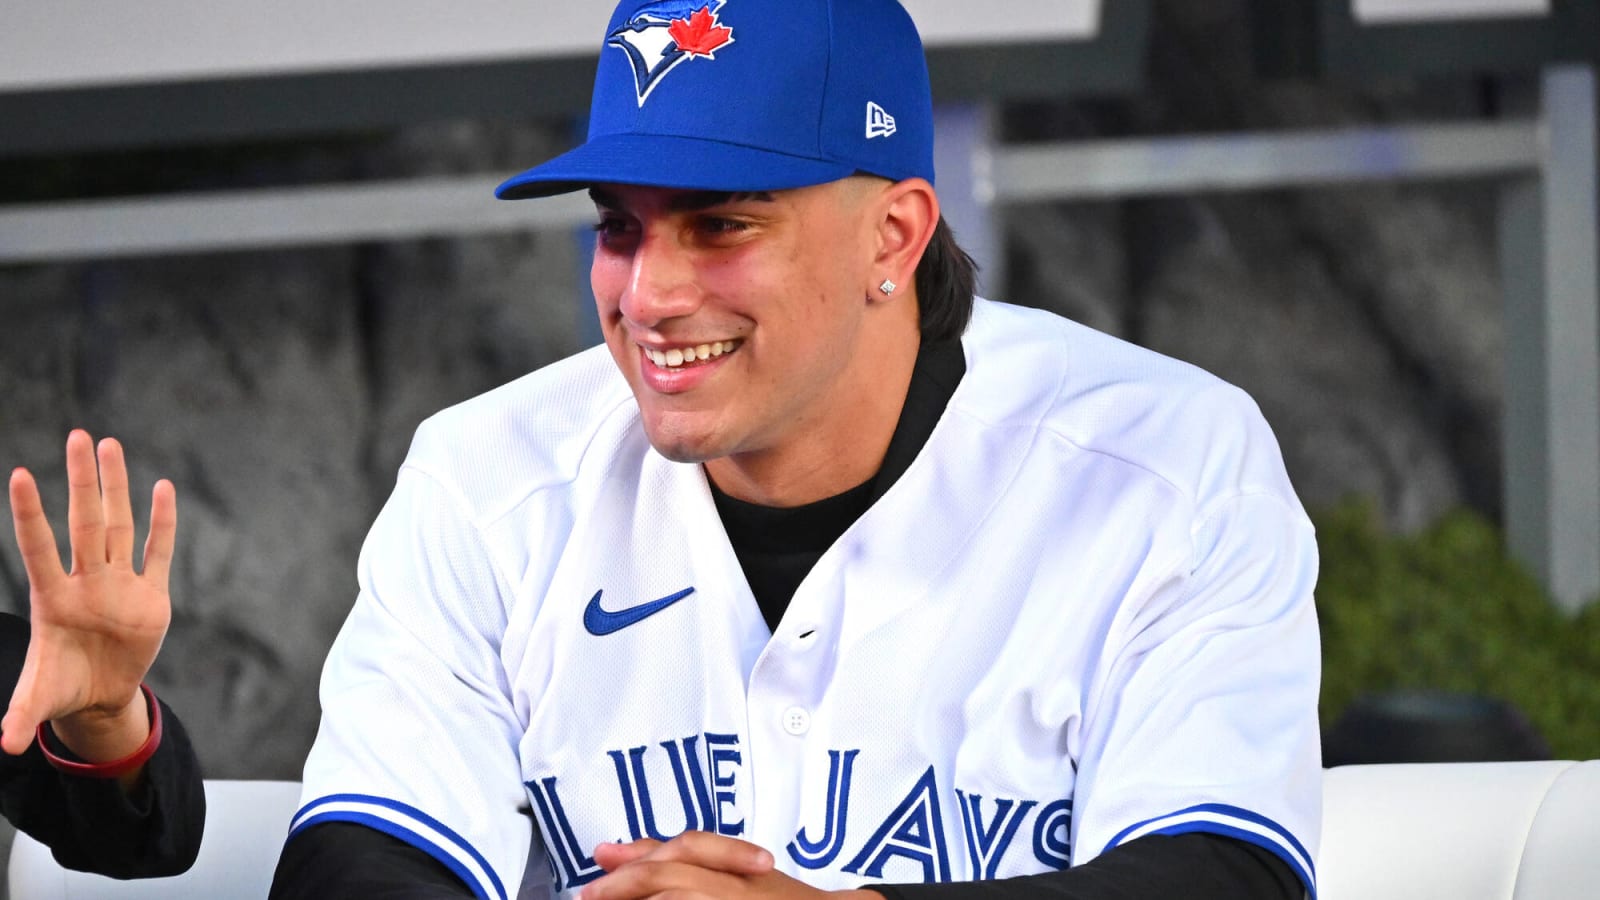 With plenty of high-upside talent, the 2023 MLB draft looks like a win for the Blue Jays